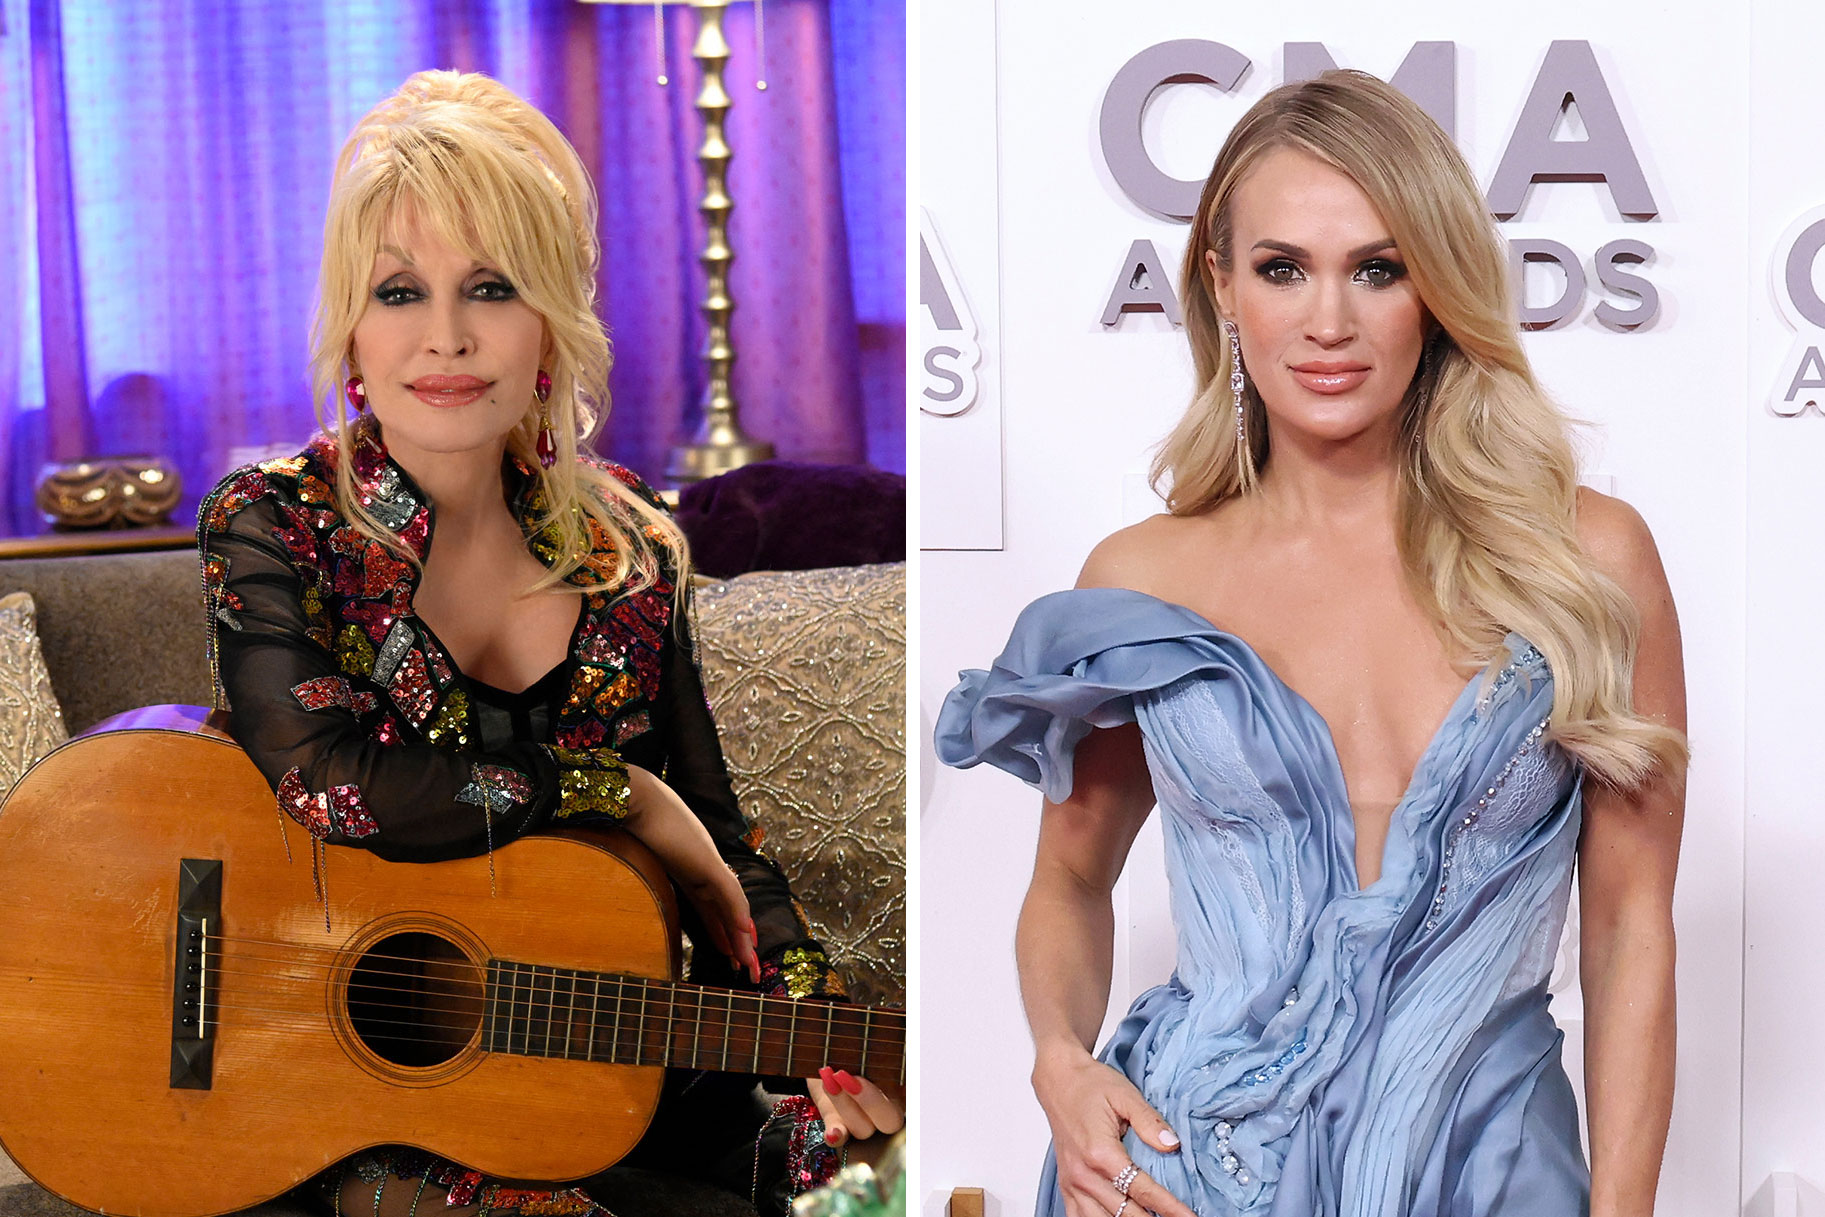 Carrie Underwood & Dolly Parton Duet I Will Always Love You